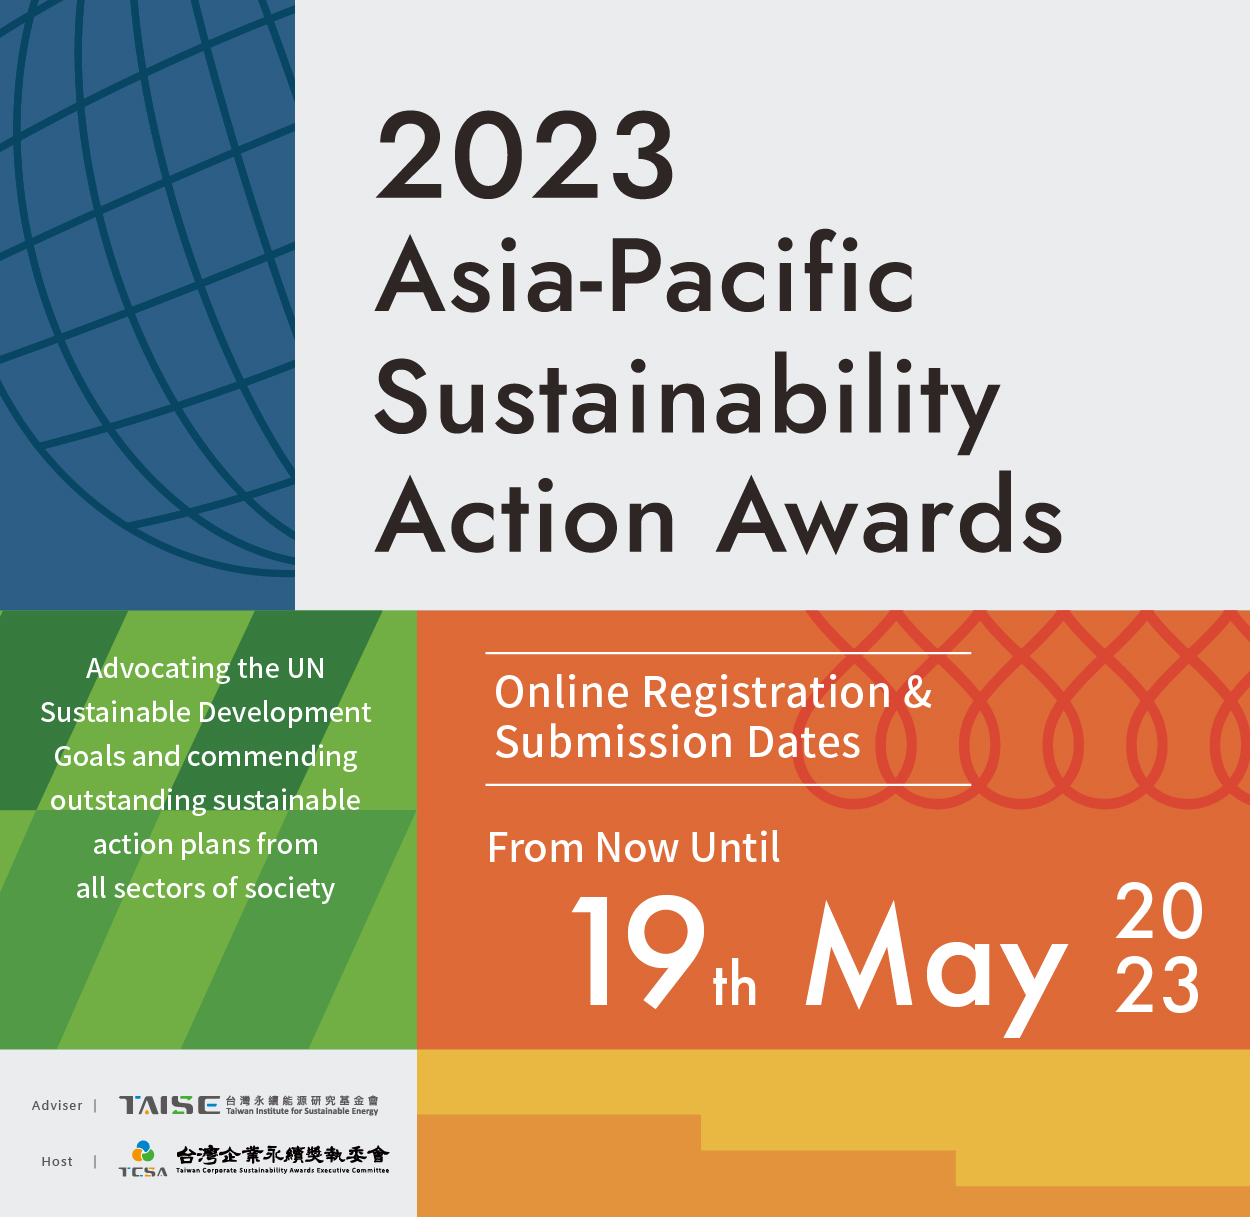 2023 Asia-Pacific Sustainability Action Awards Are Open Now 